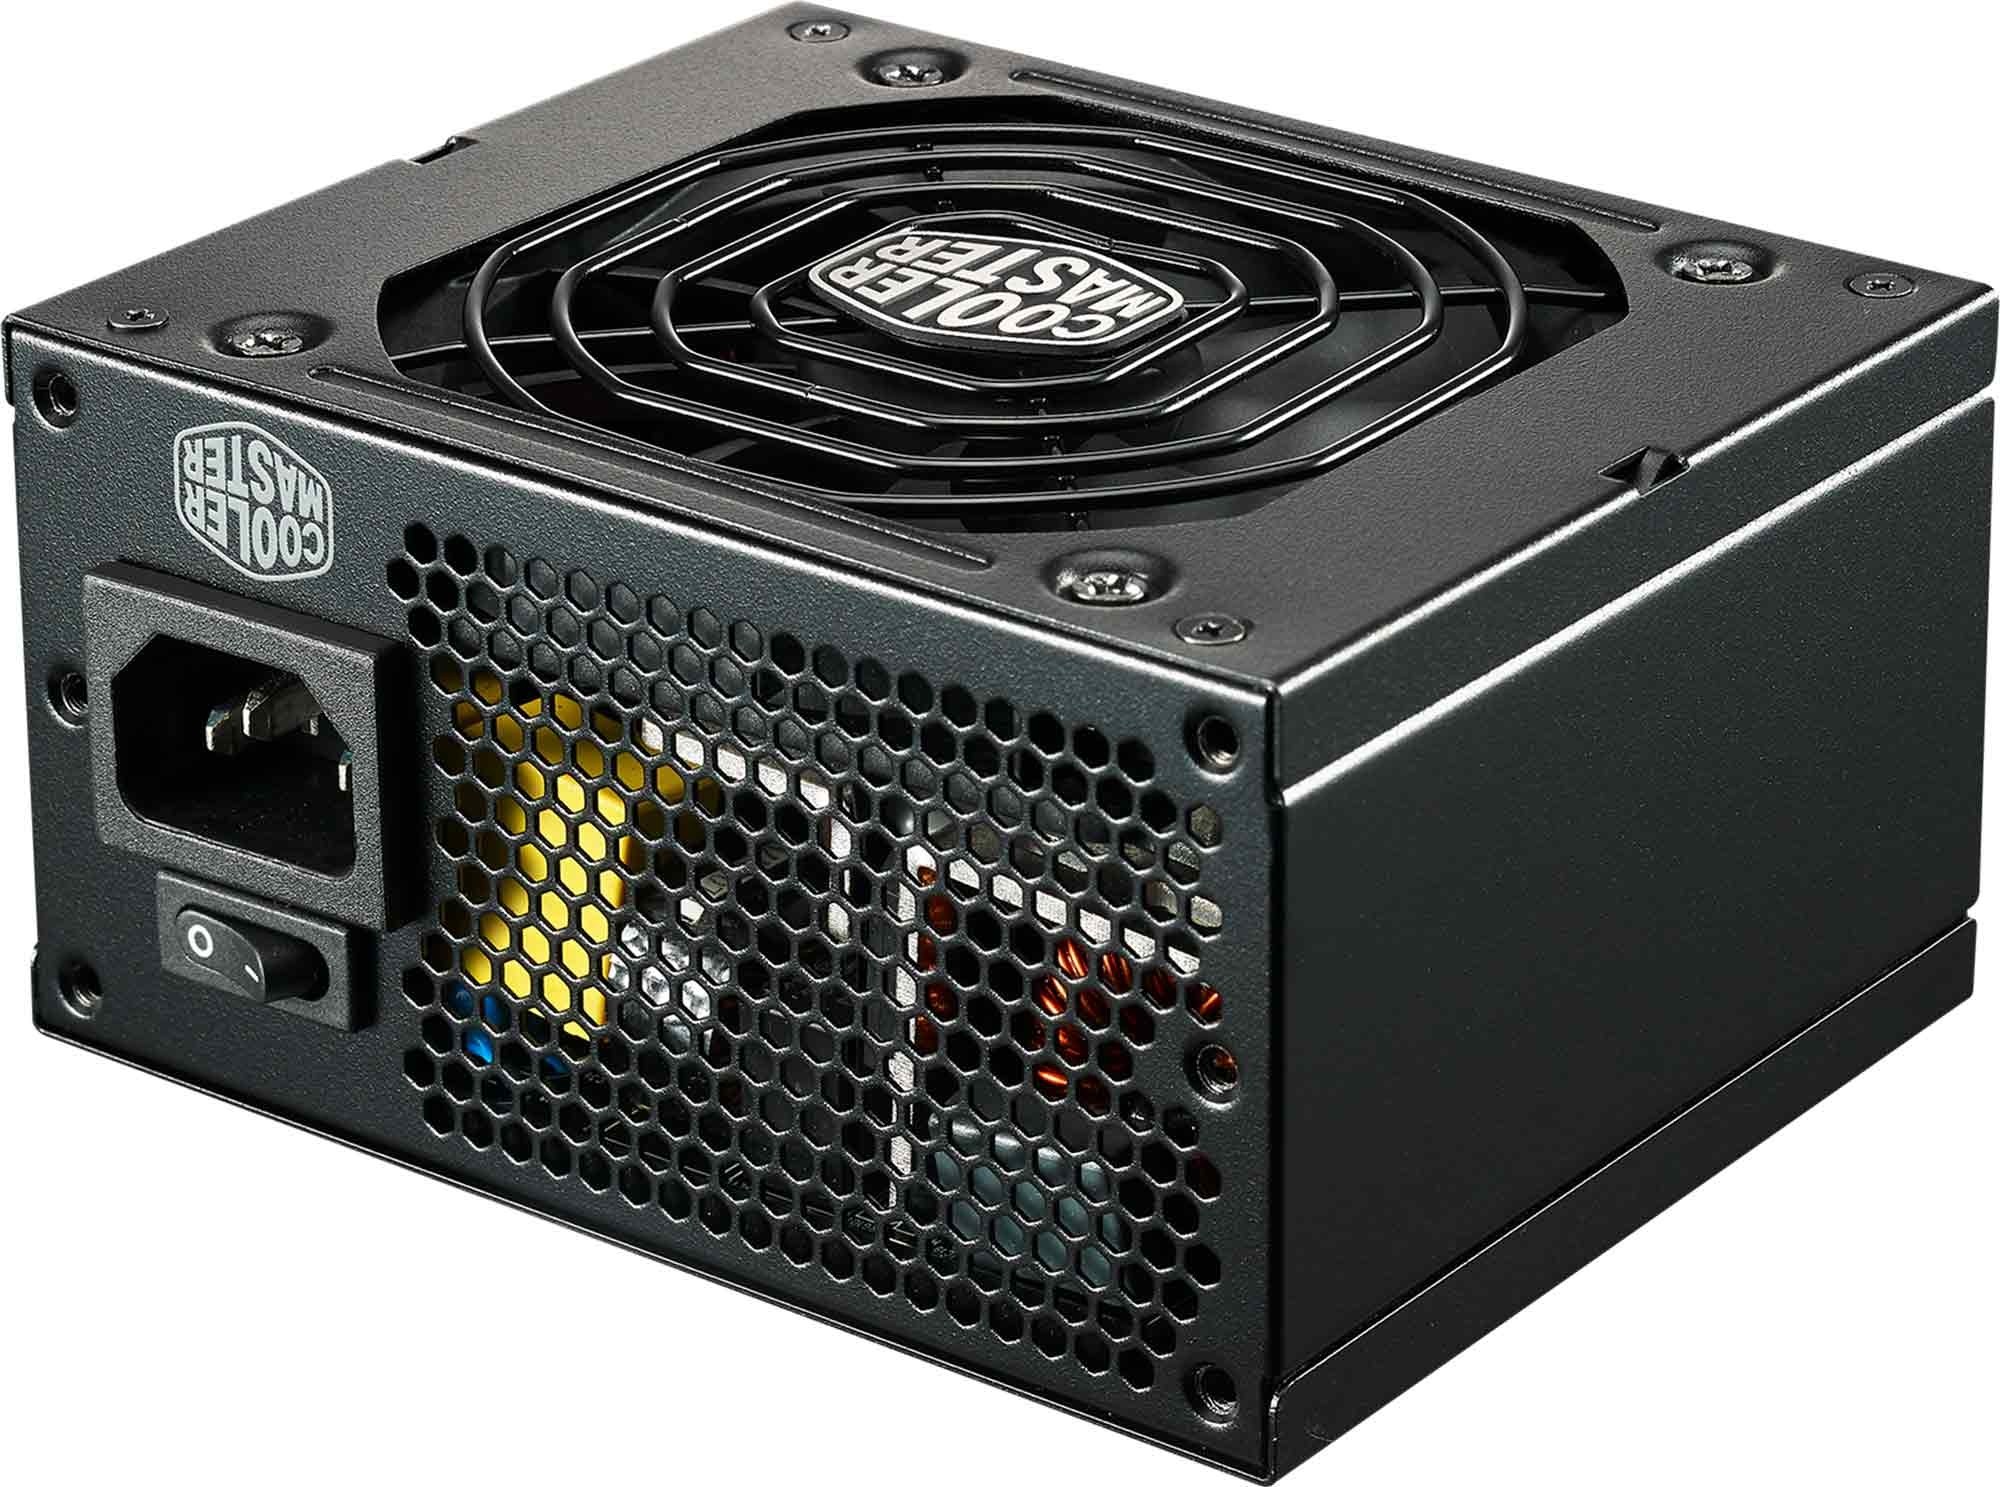 CM PSU V Gold 650W SFX; Fully Modular. Gold Rated; For SFX Chassis; has ATX Bracket included